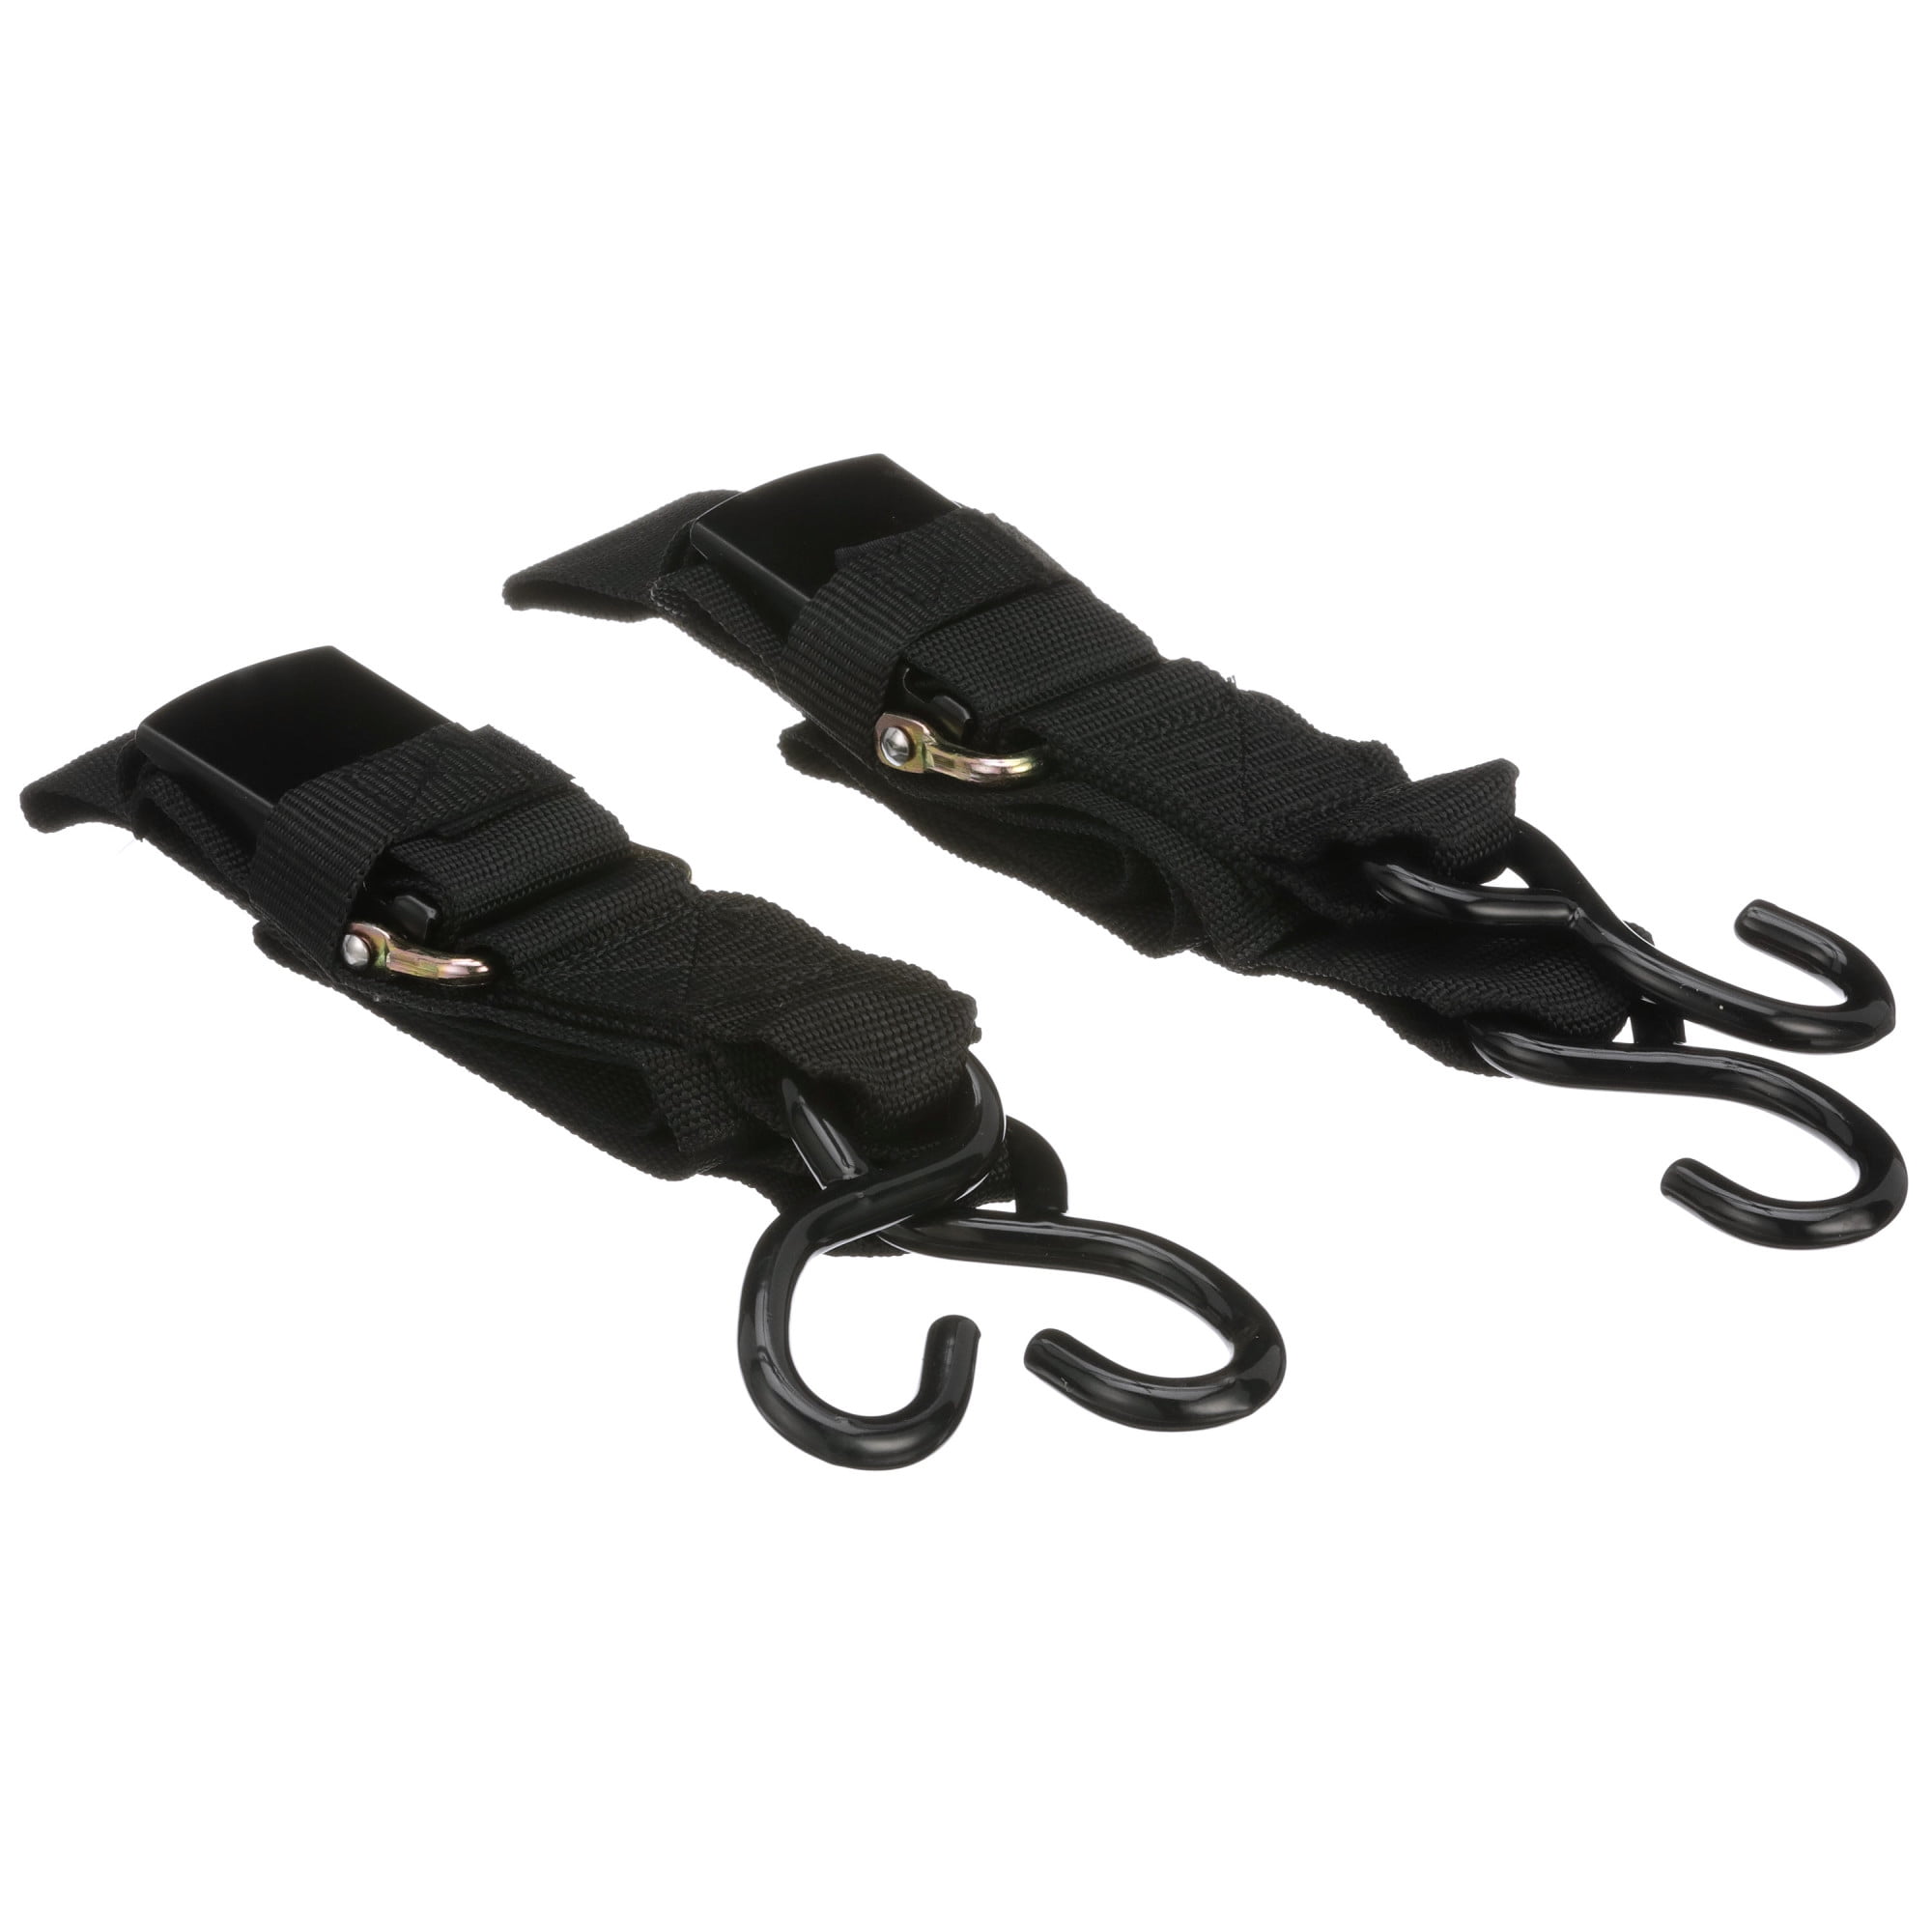 Details about   Camco Heavy Duty Retractable Ratchet Tie Down Straps for Hauling and Transpor... 